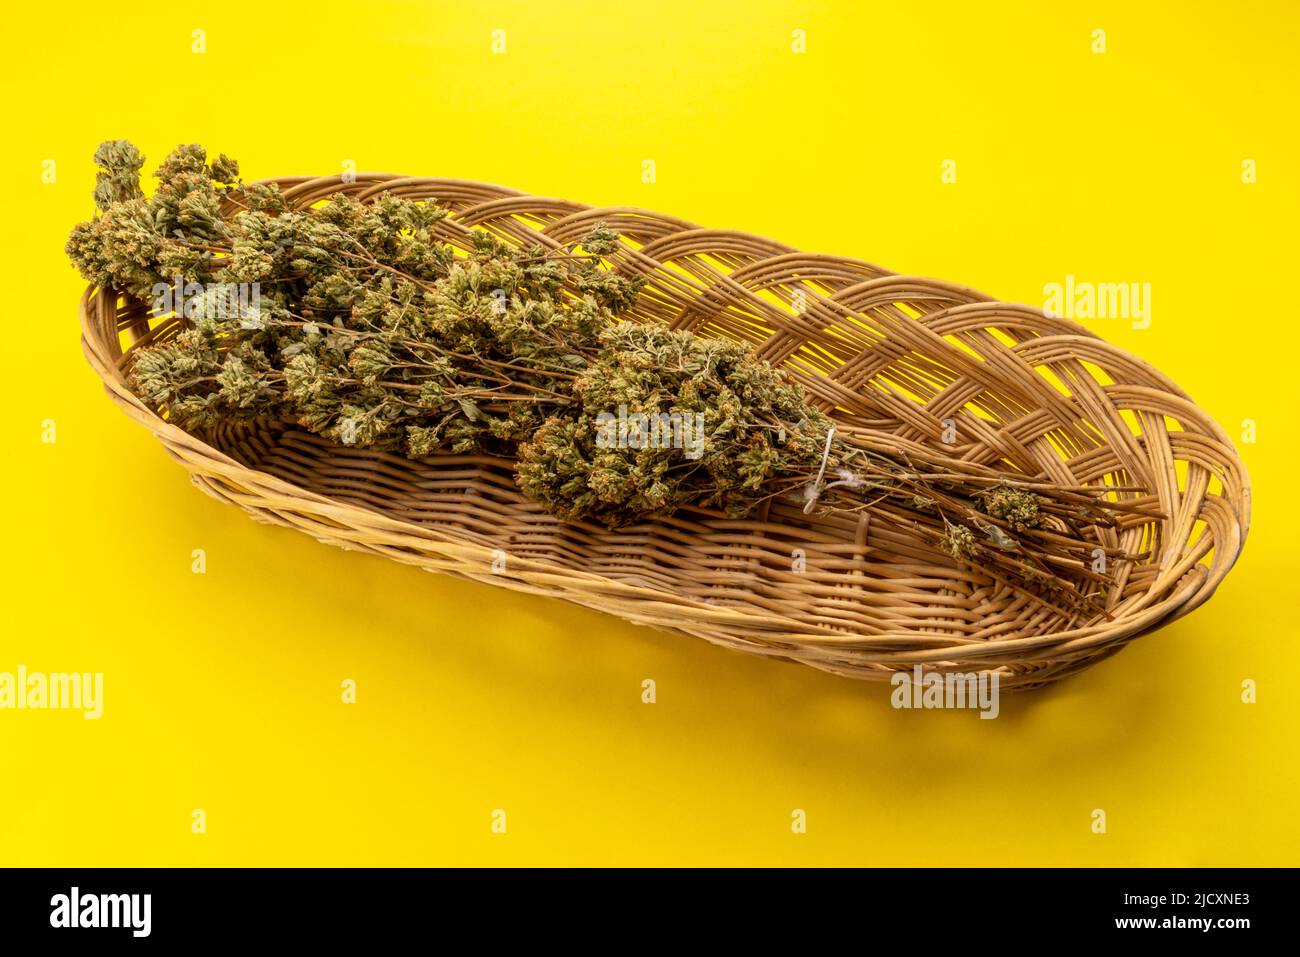 Bunch of dried oregano in wicker basket isolated on giallo background, typical aromatic herb for cuisine and for pizza Stock Photo